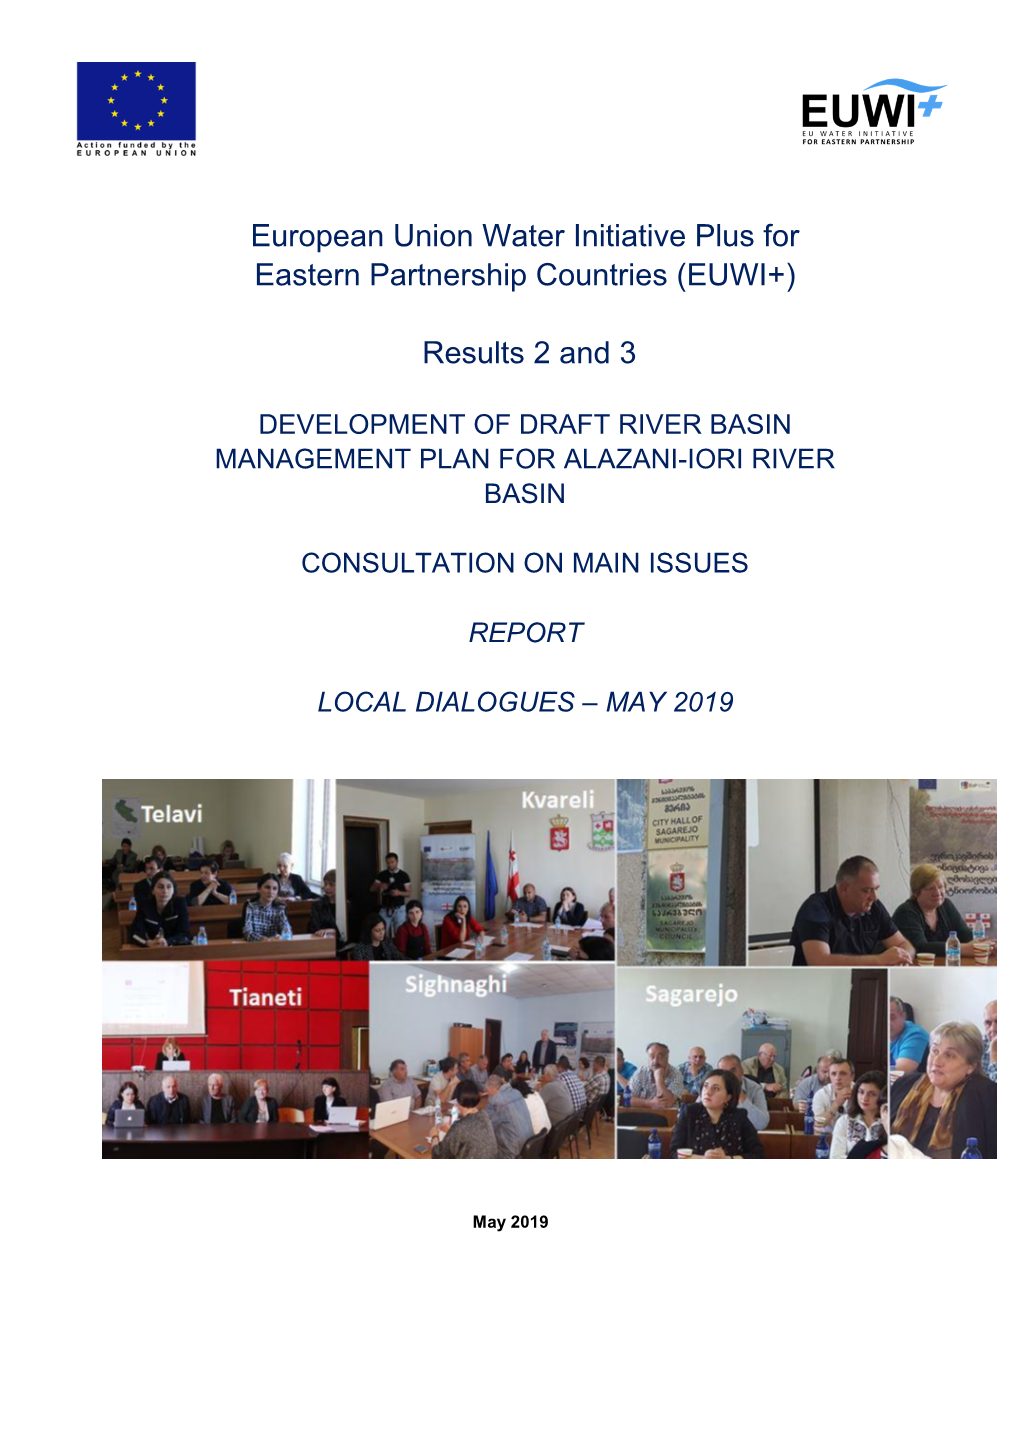 European Union Water Initiative Plus for Eastern Partnership Countries (EUWI+) Results 2 and 3